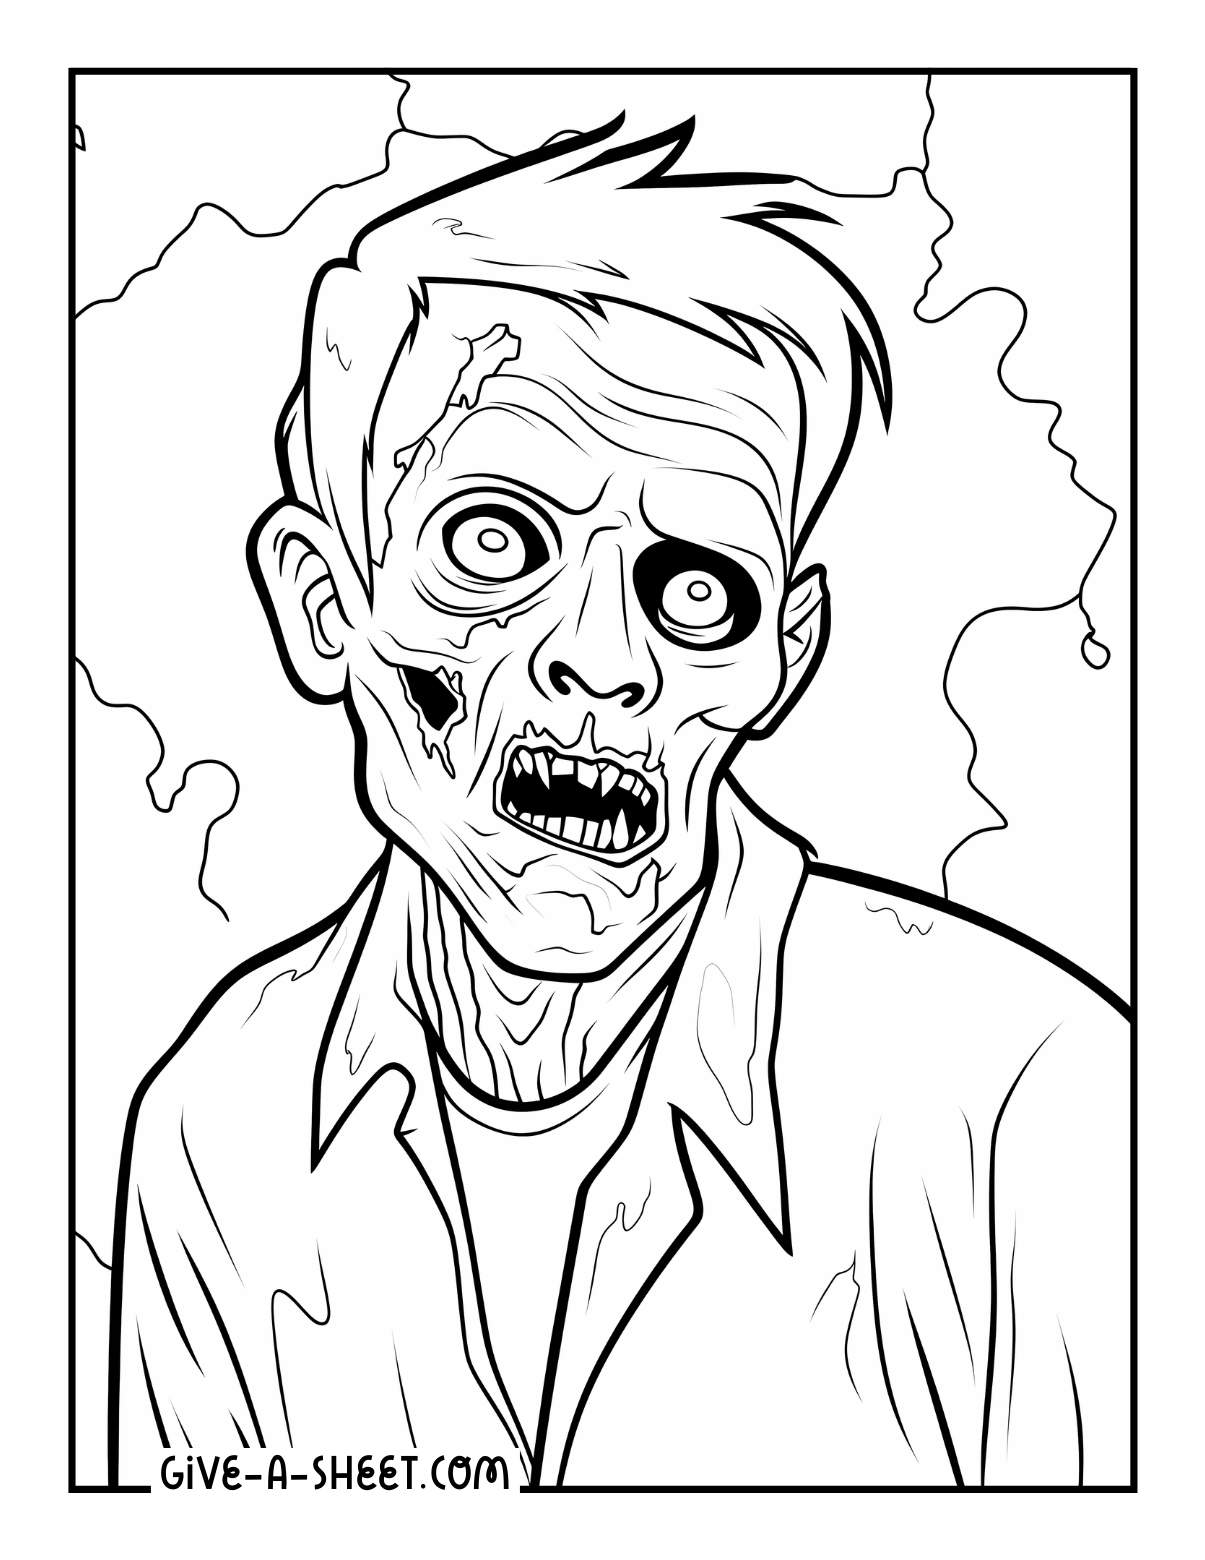 Disney zombies infected coloring page for adults.